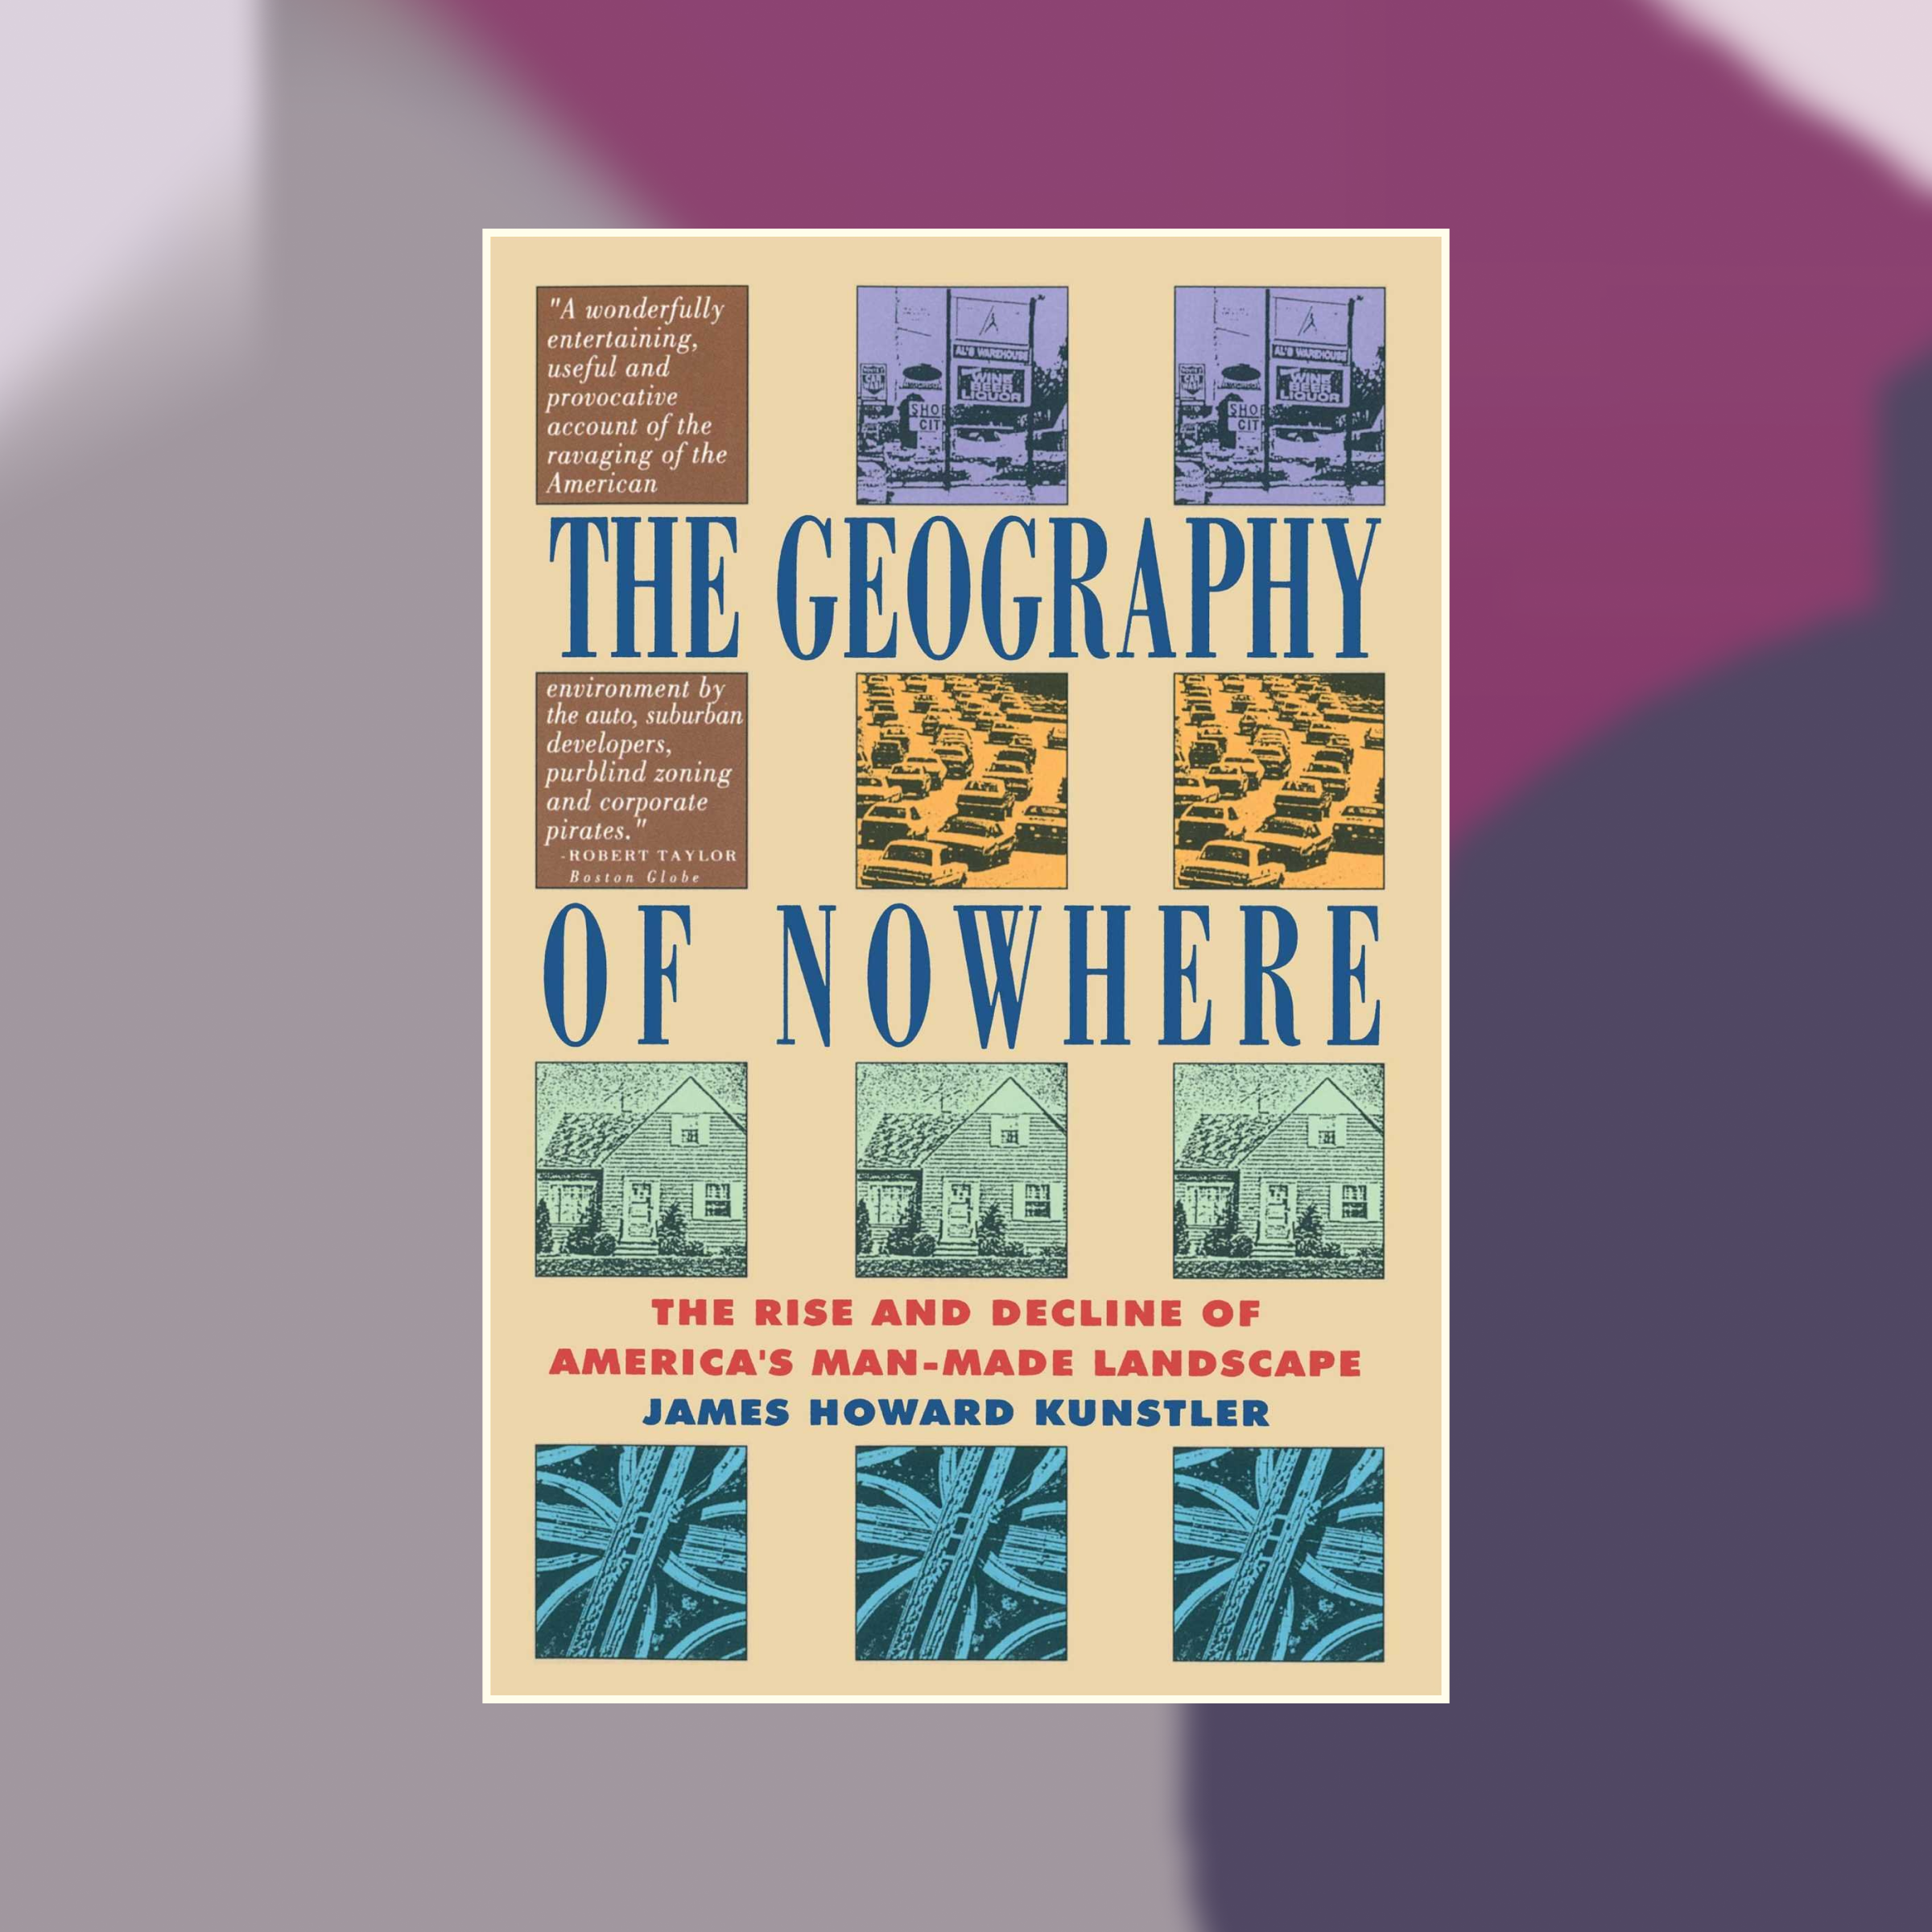 Book cover of The Geography of Nowhere against an abstract painted background